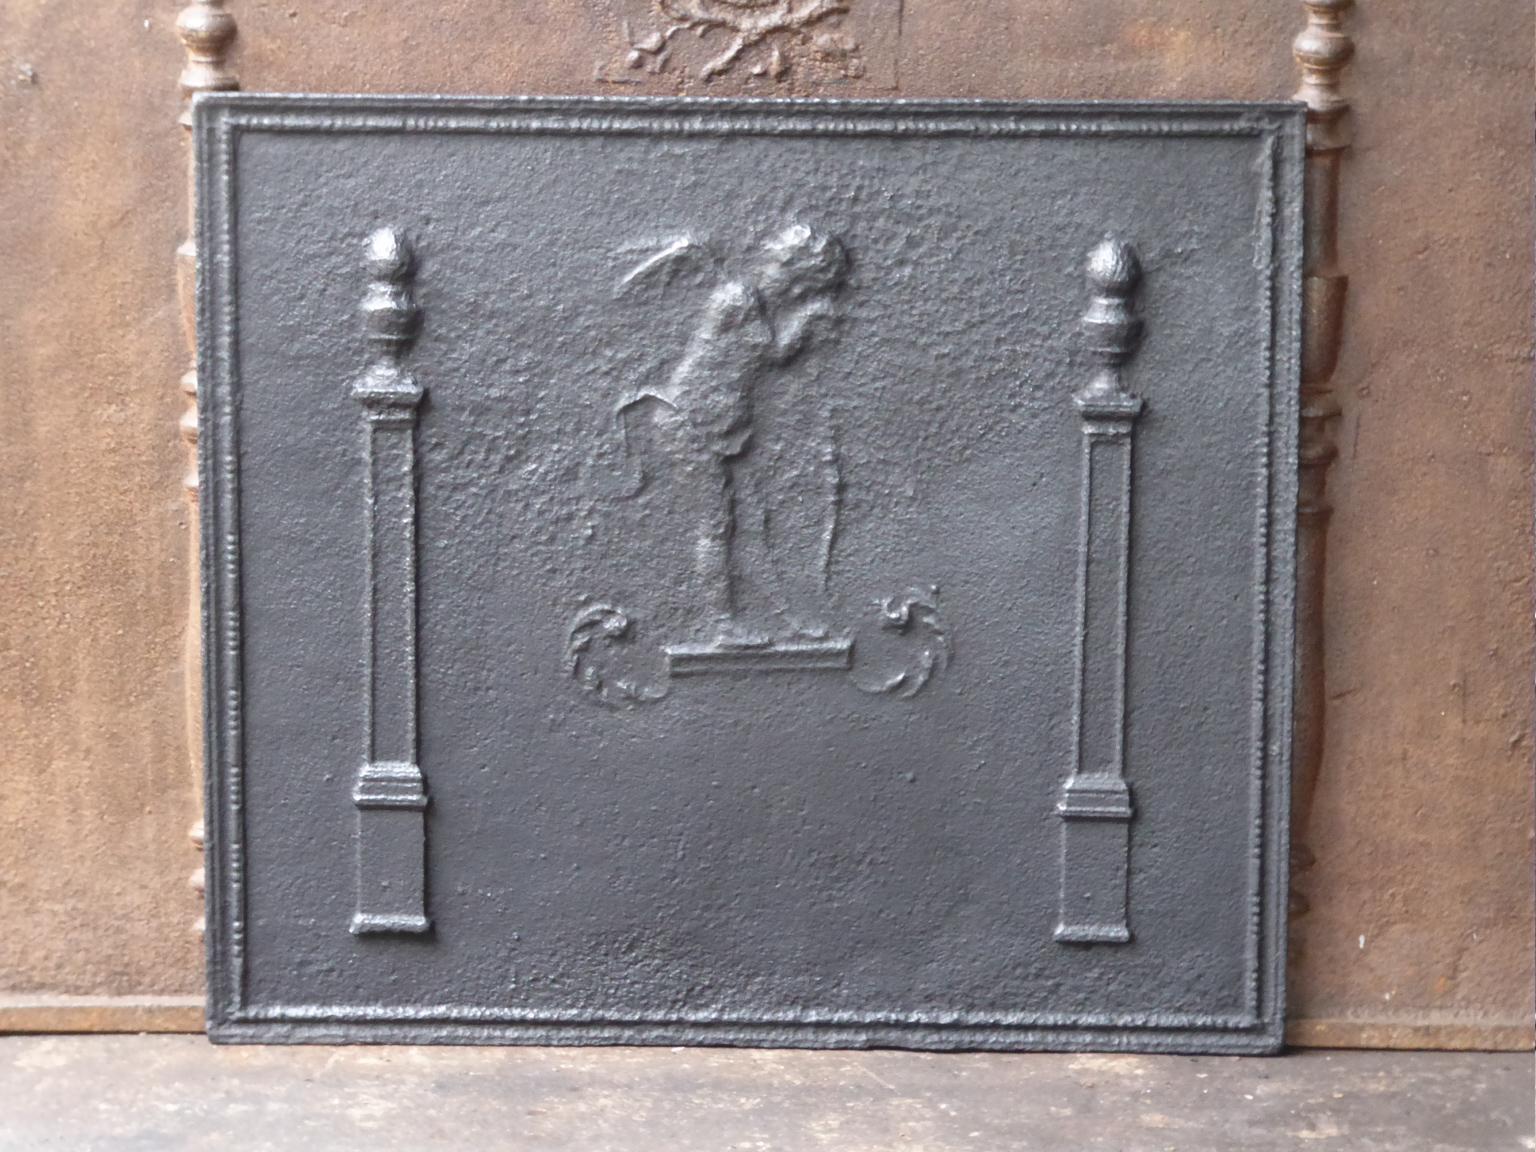 18th-19th century French neoclassical fireback. The cupid is flanked by two pillars of freedom, which represent one of the three values of the French Revolution.

The fireback is made of cast iron and has a black patina. The fireback is in a good